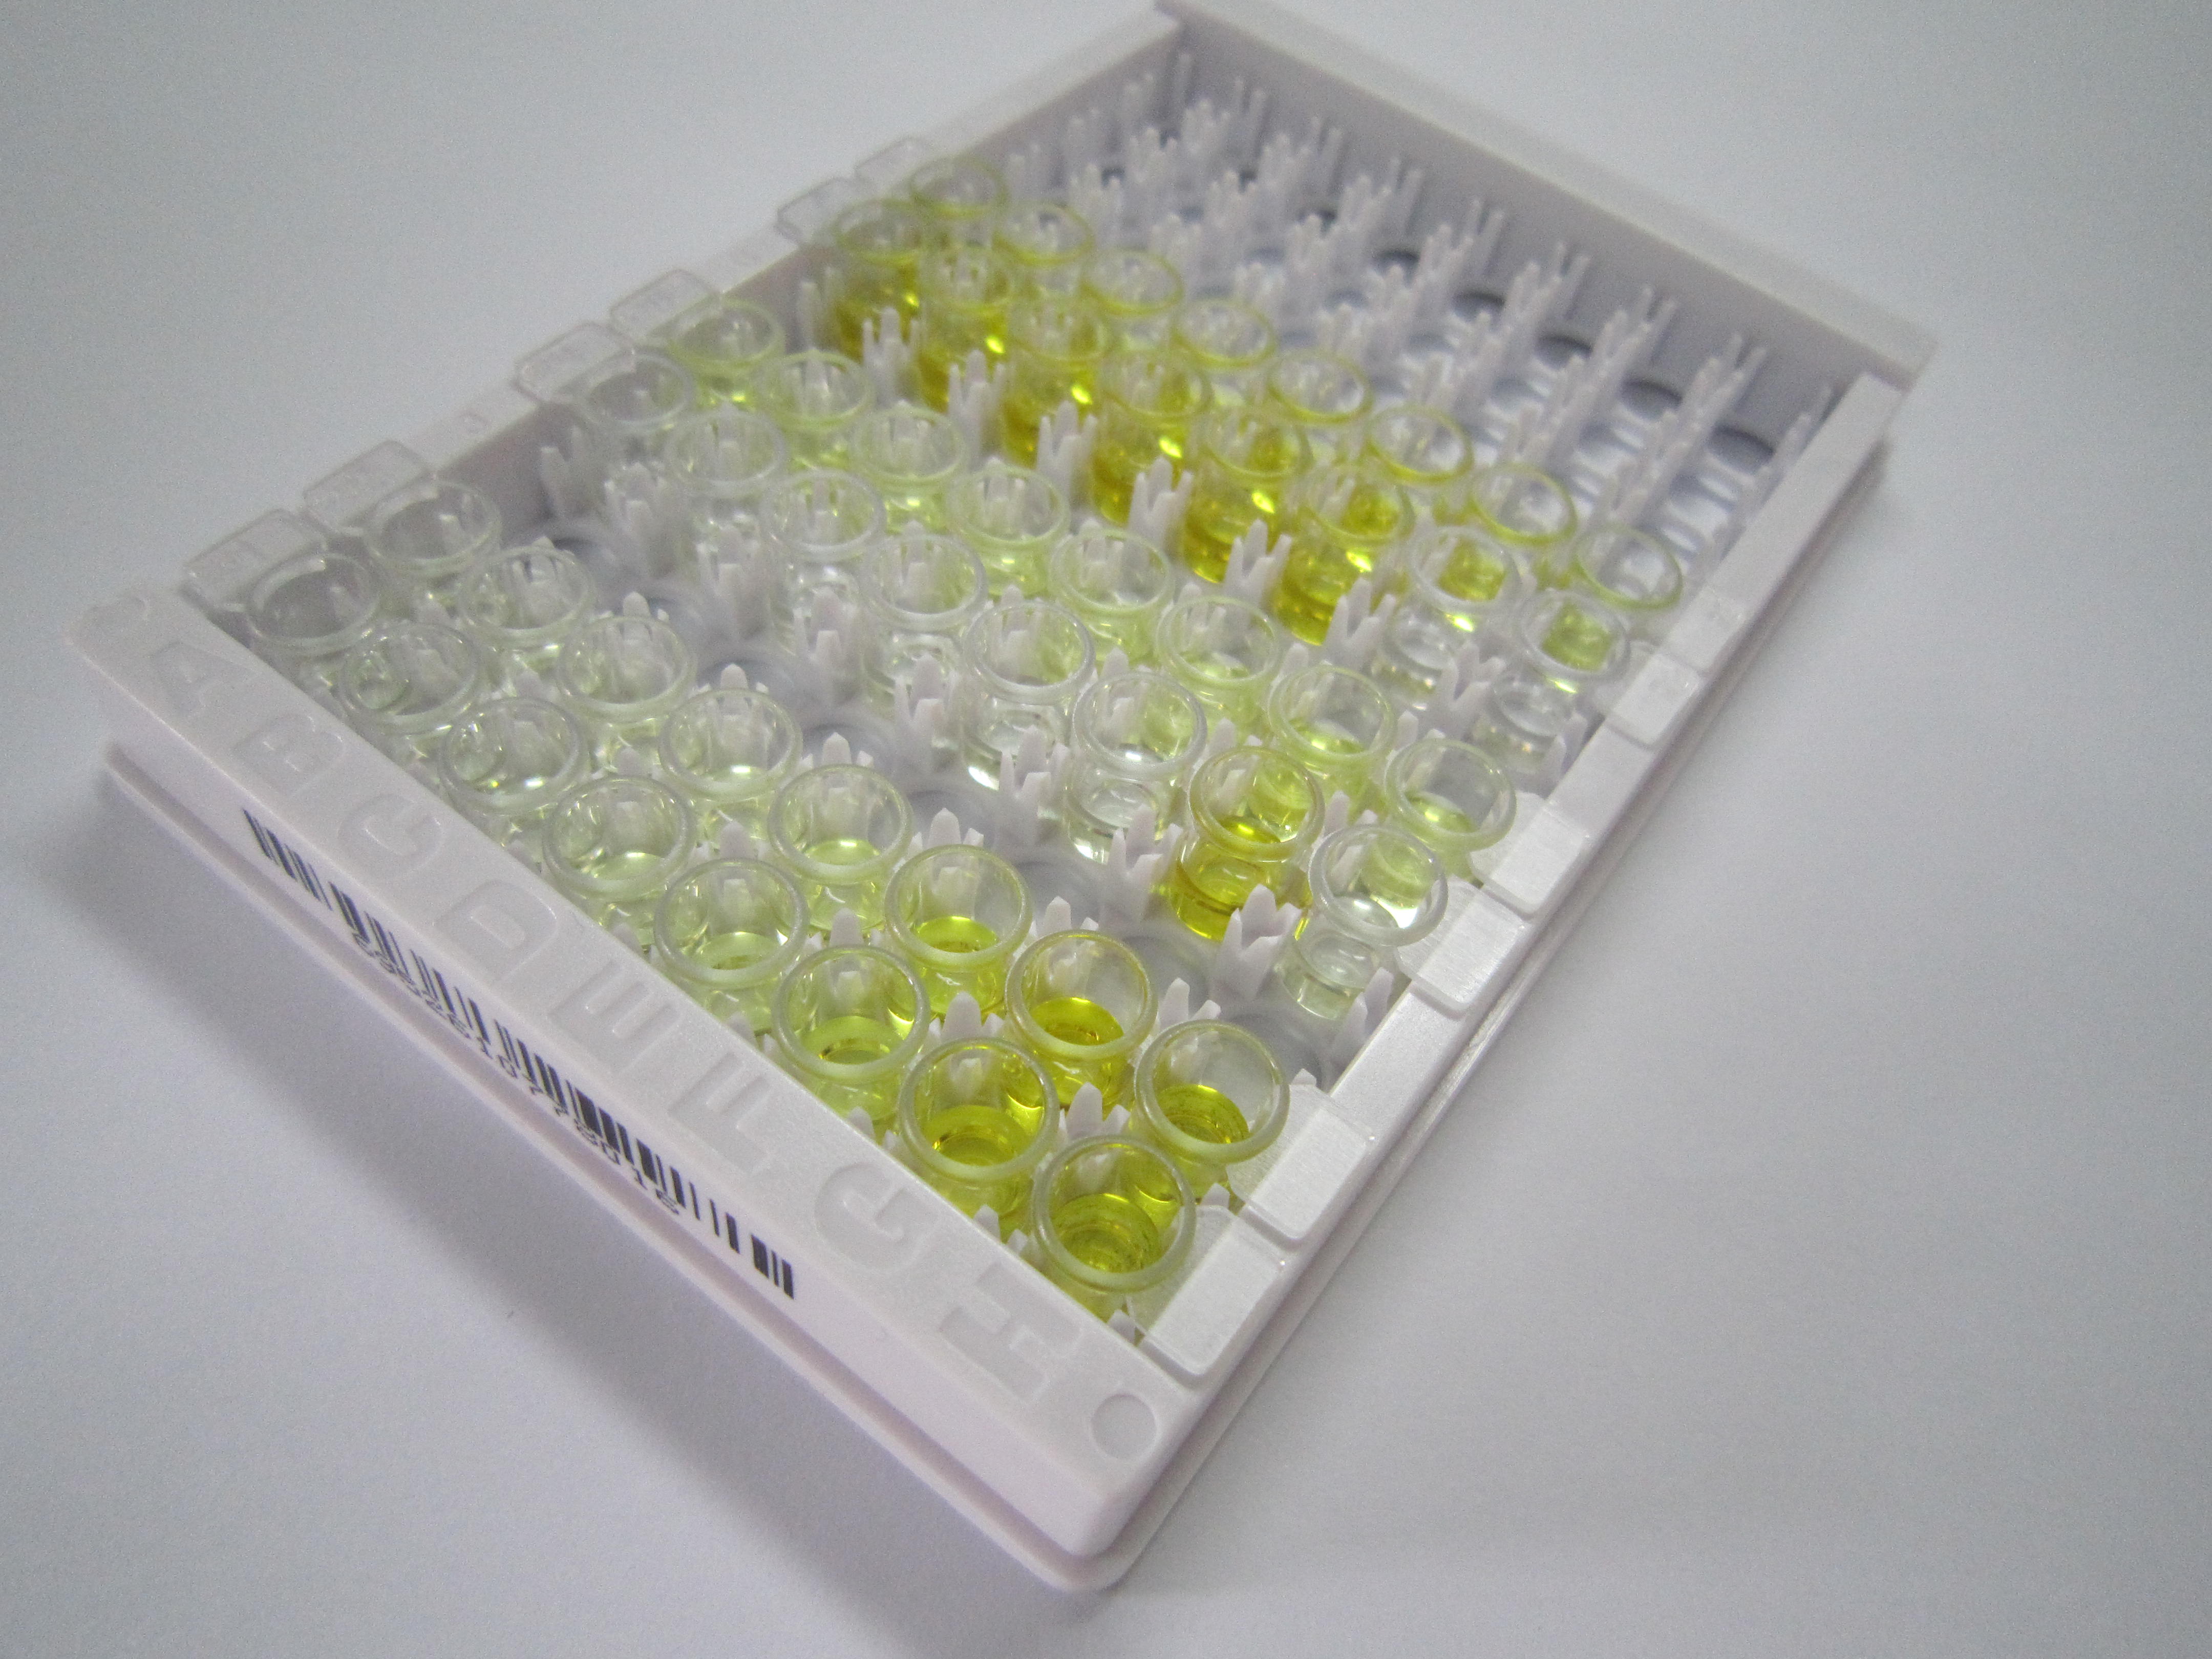 ELISA Kit for Short Palate, Lung And Nasal Epithelium Carcinoma Associated Protein 2 (SPLUNC2)